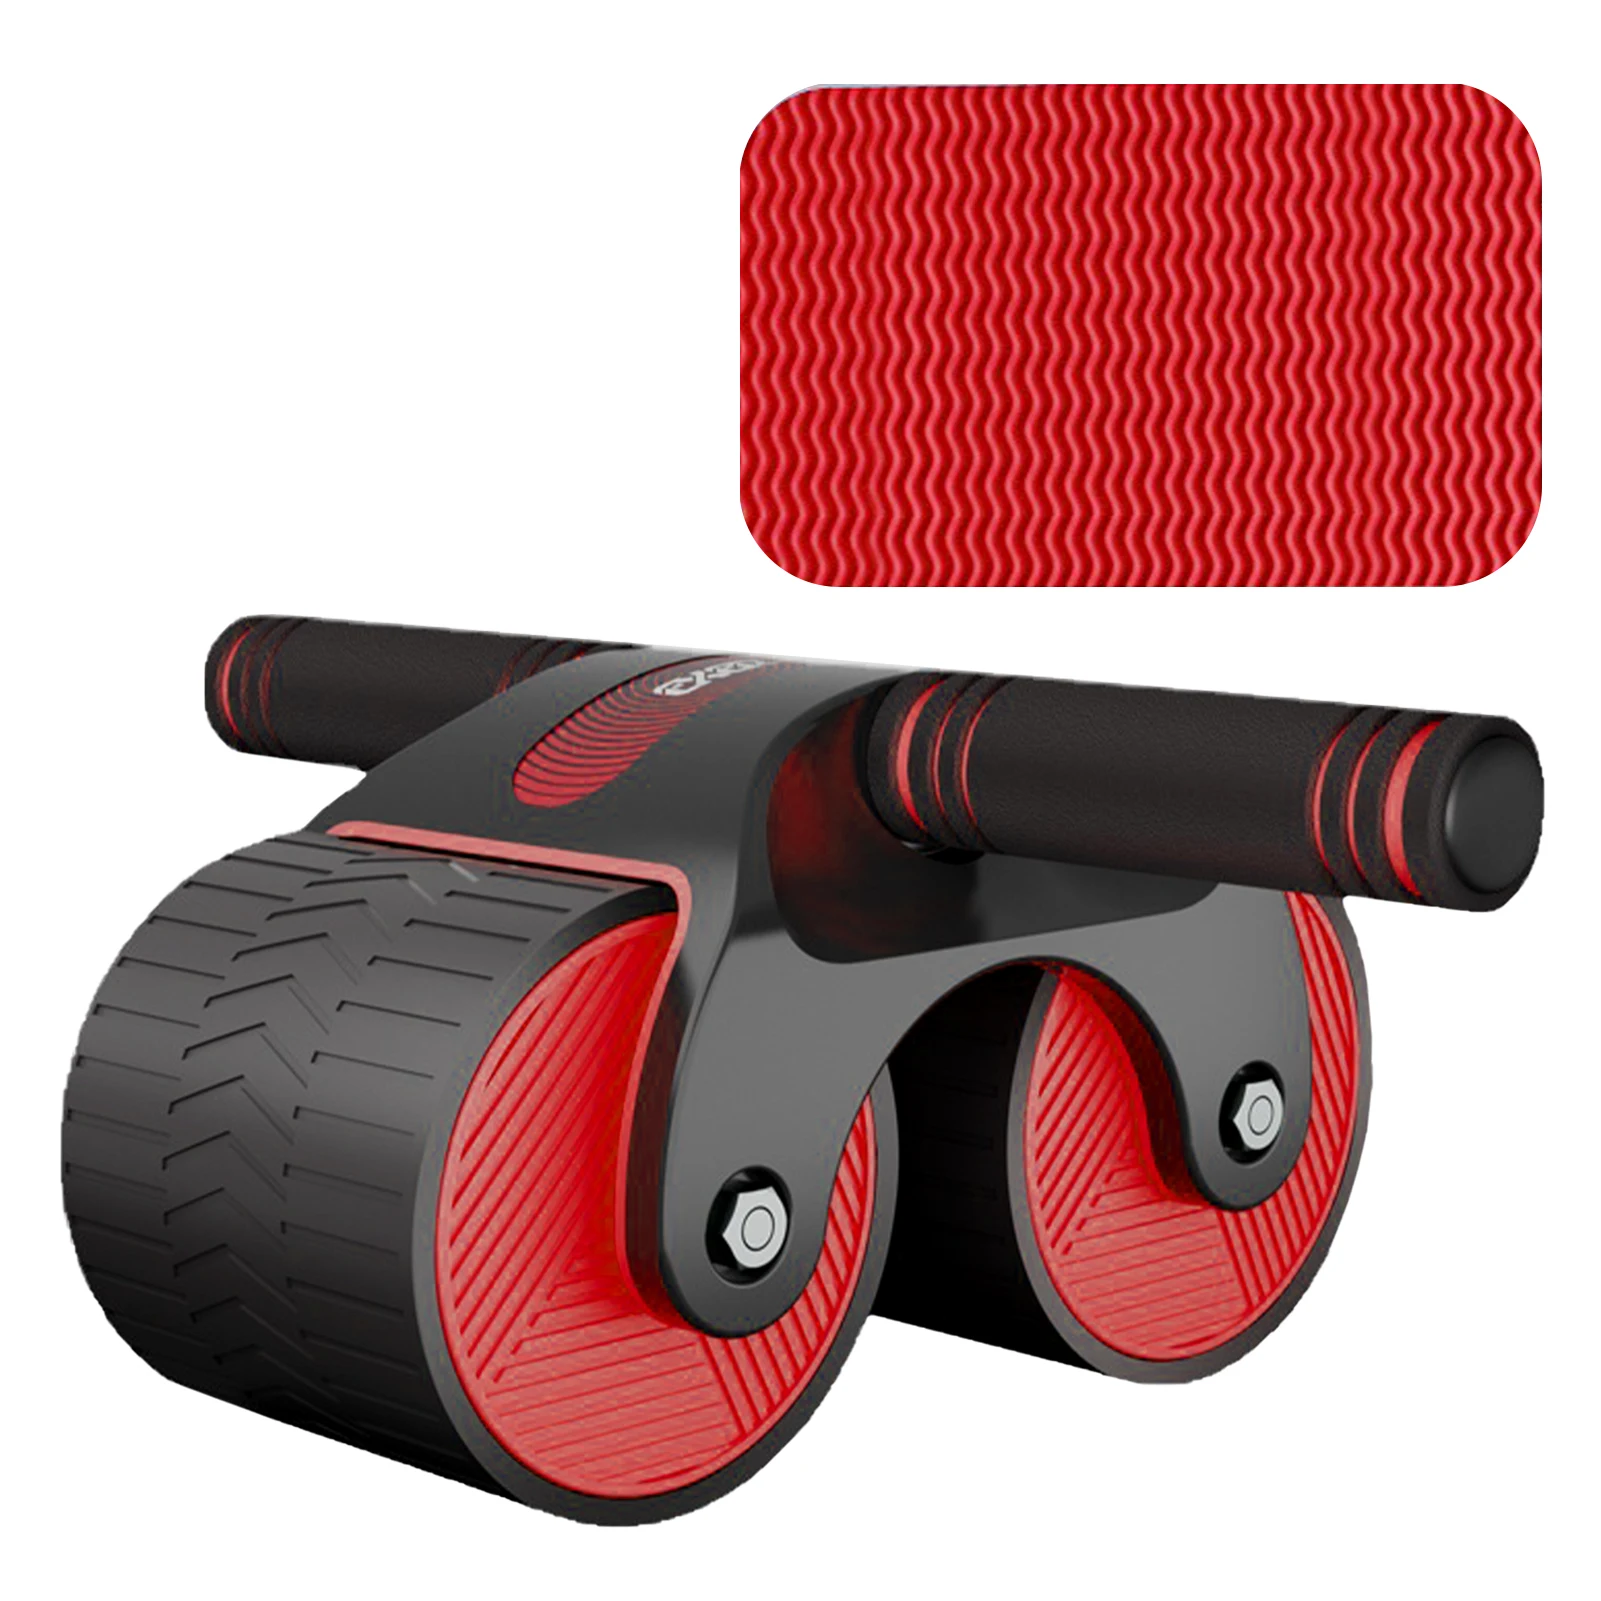 

Core Workouts Gym Automatic Rebound Fitness Home Domestic Ab Roller Wheel Double Sturdy Abdominal Exerciser Strength Training